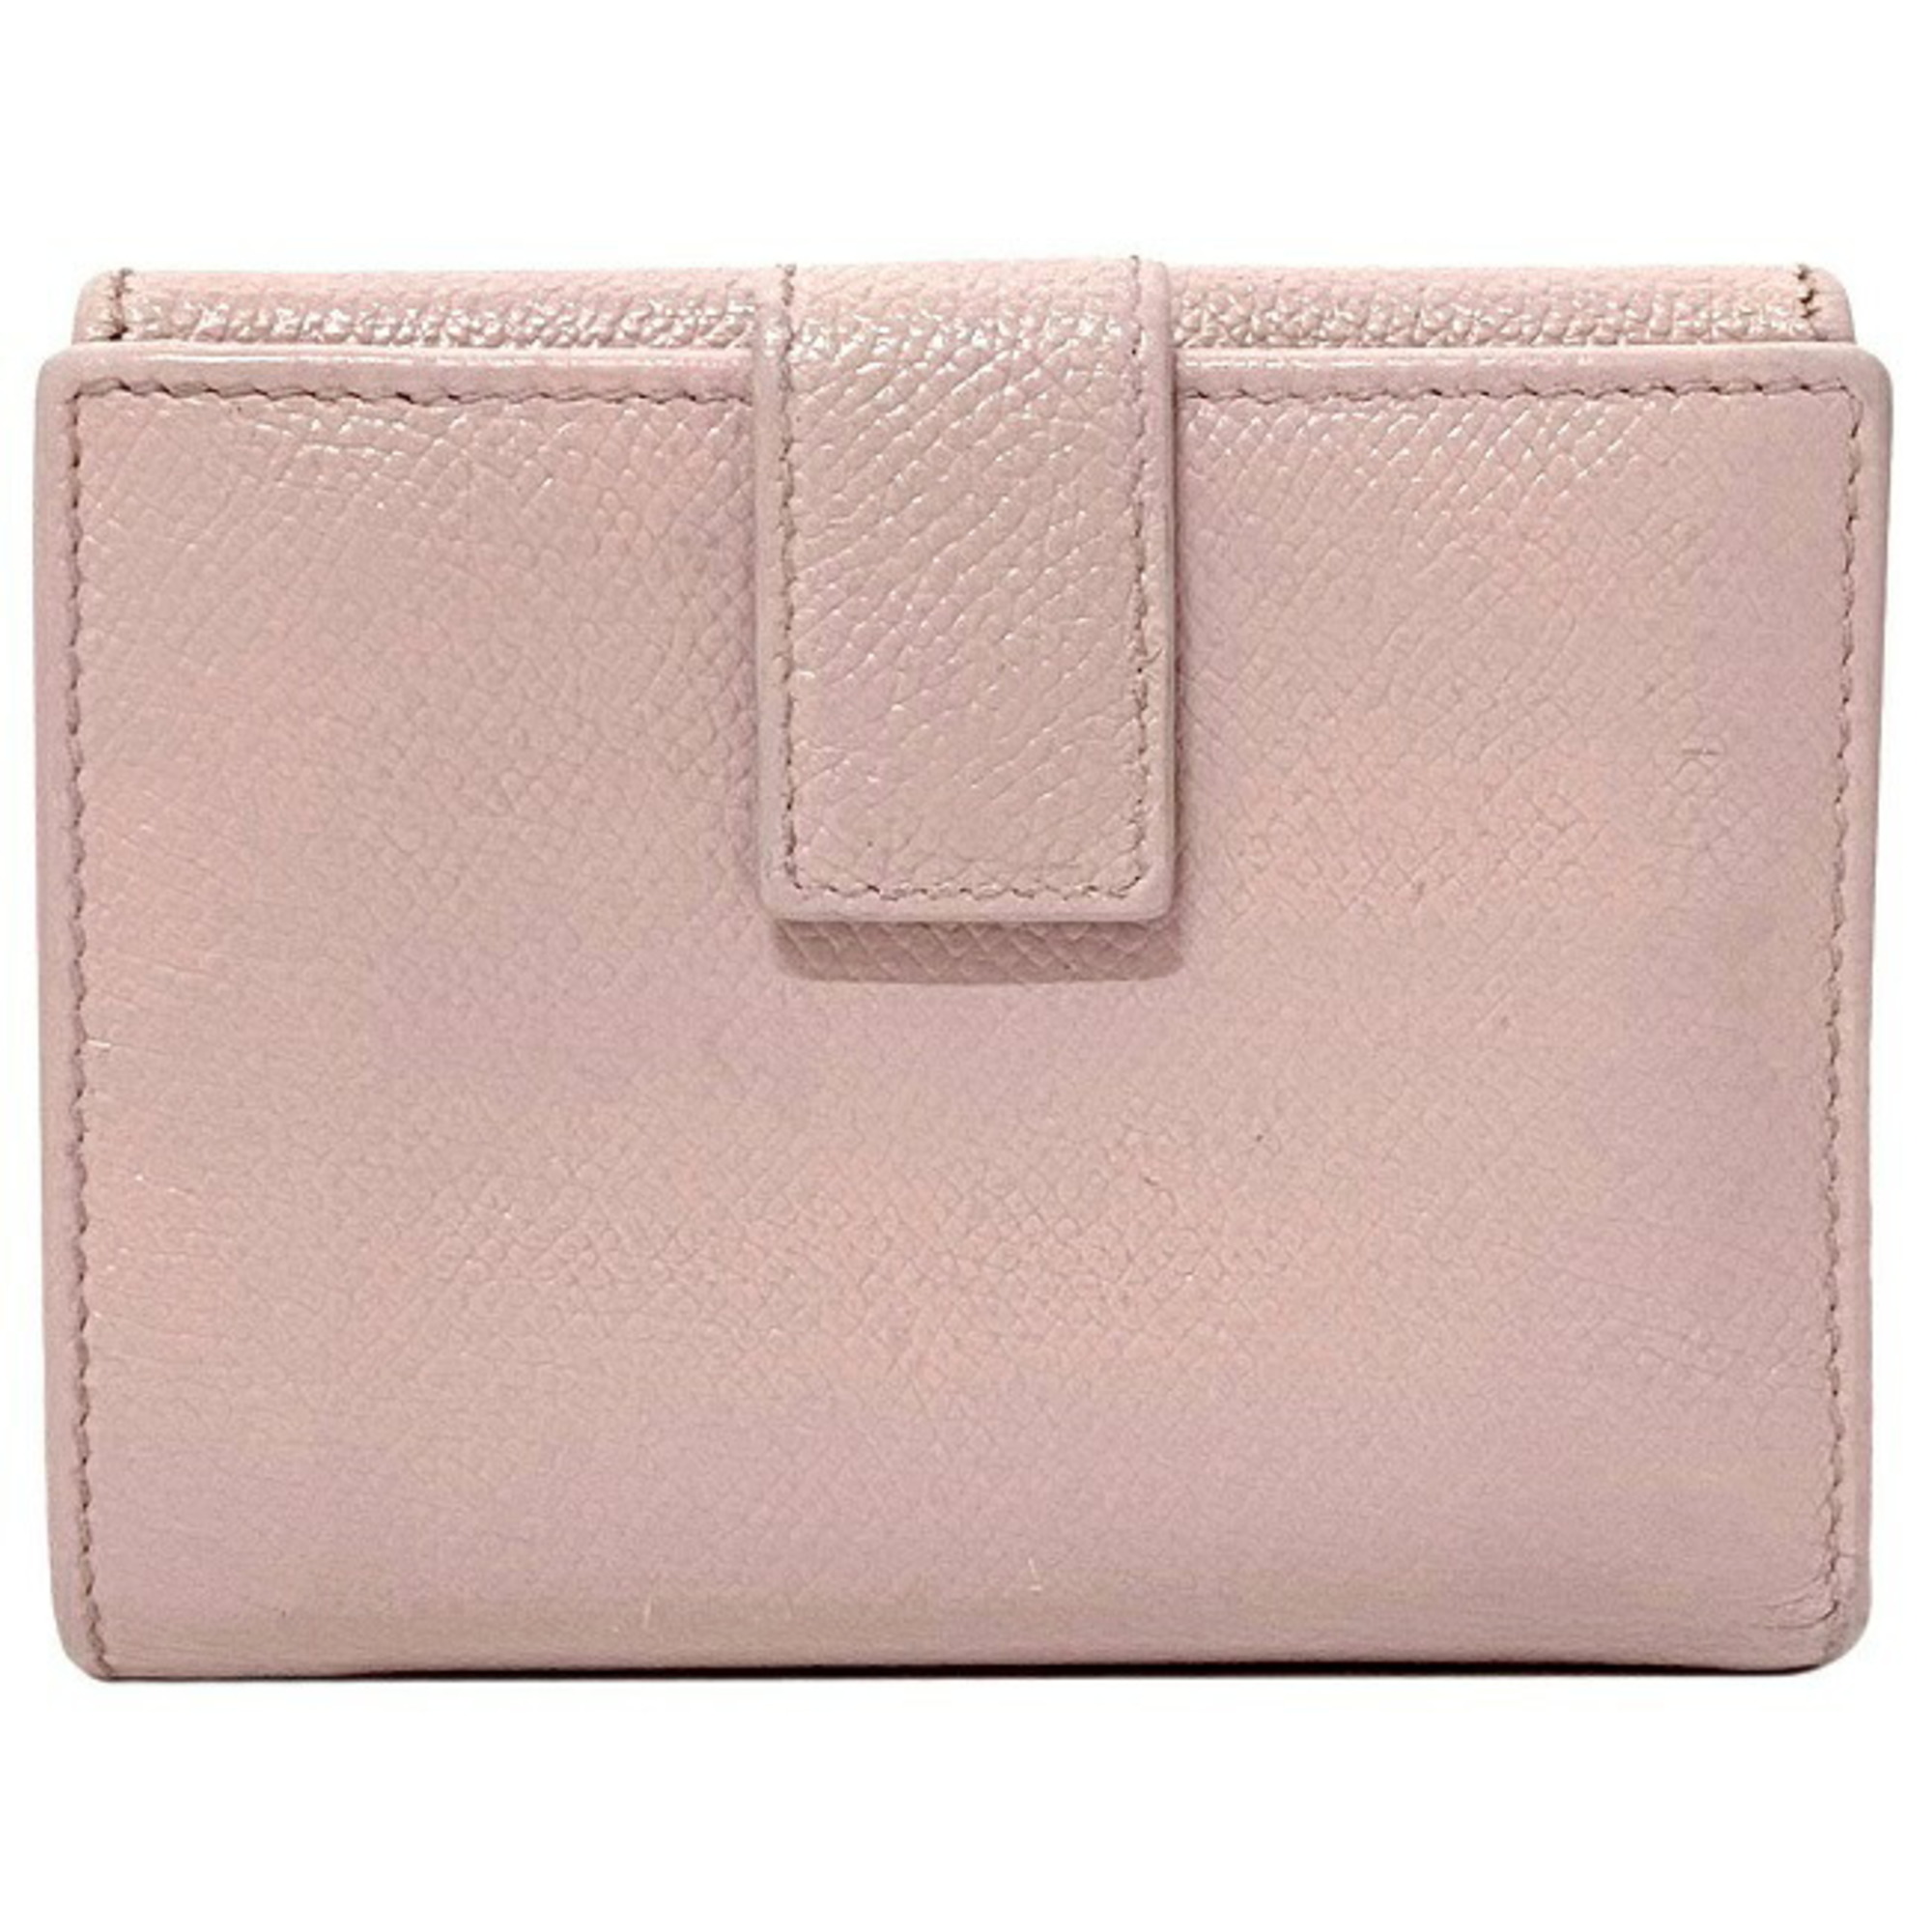 Salvatore Ferragamo W Folio Wallet Pink Silver Gancini 22 C880 Double Leather Compact with Clear Pocket